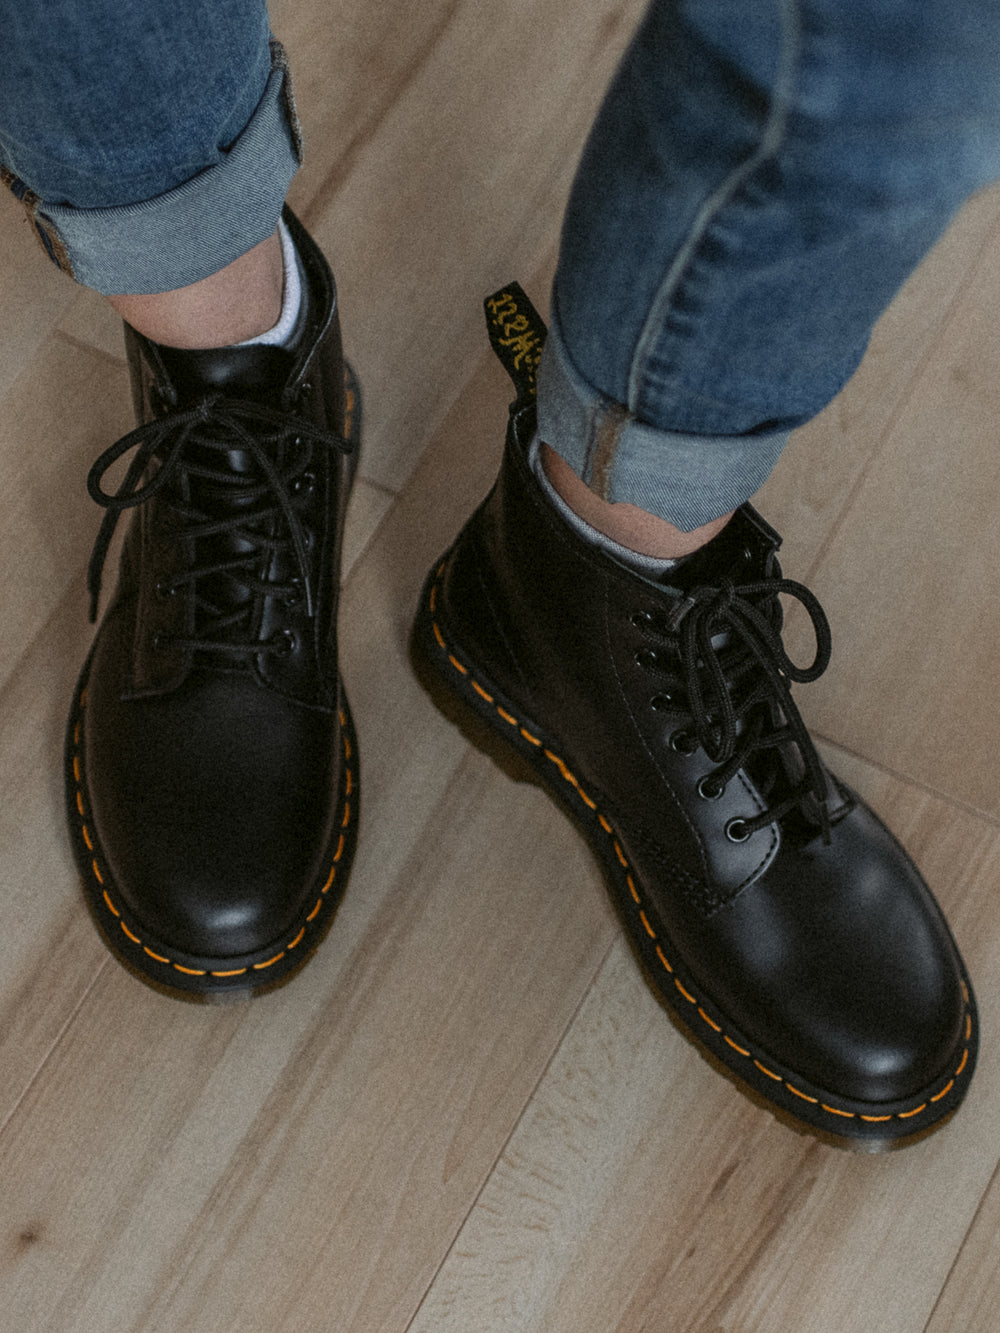 WOMENS DR MARTENS 101 YELLOW STITCH SMOOTH BOOT - CLEARANCE